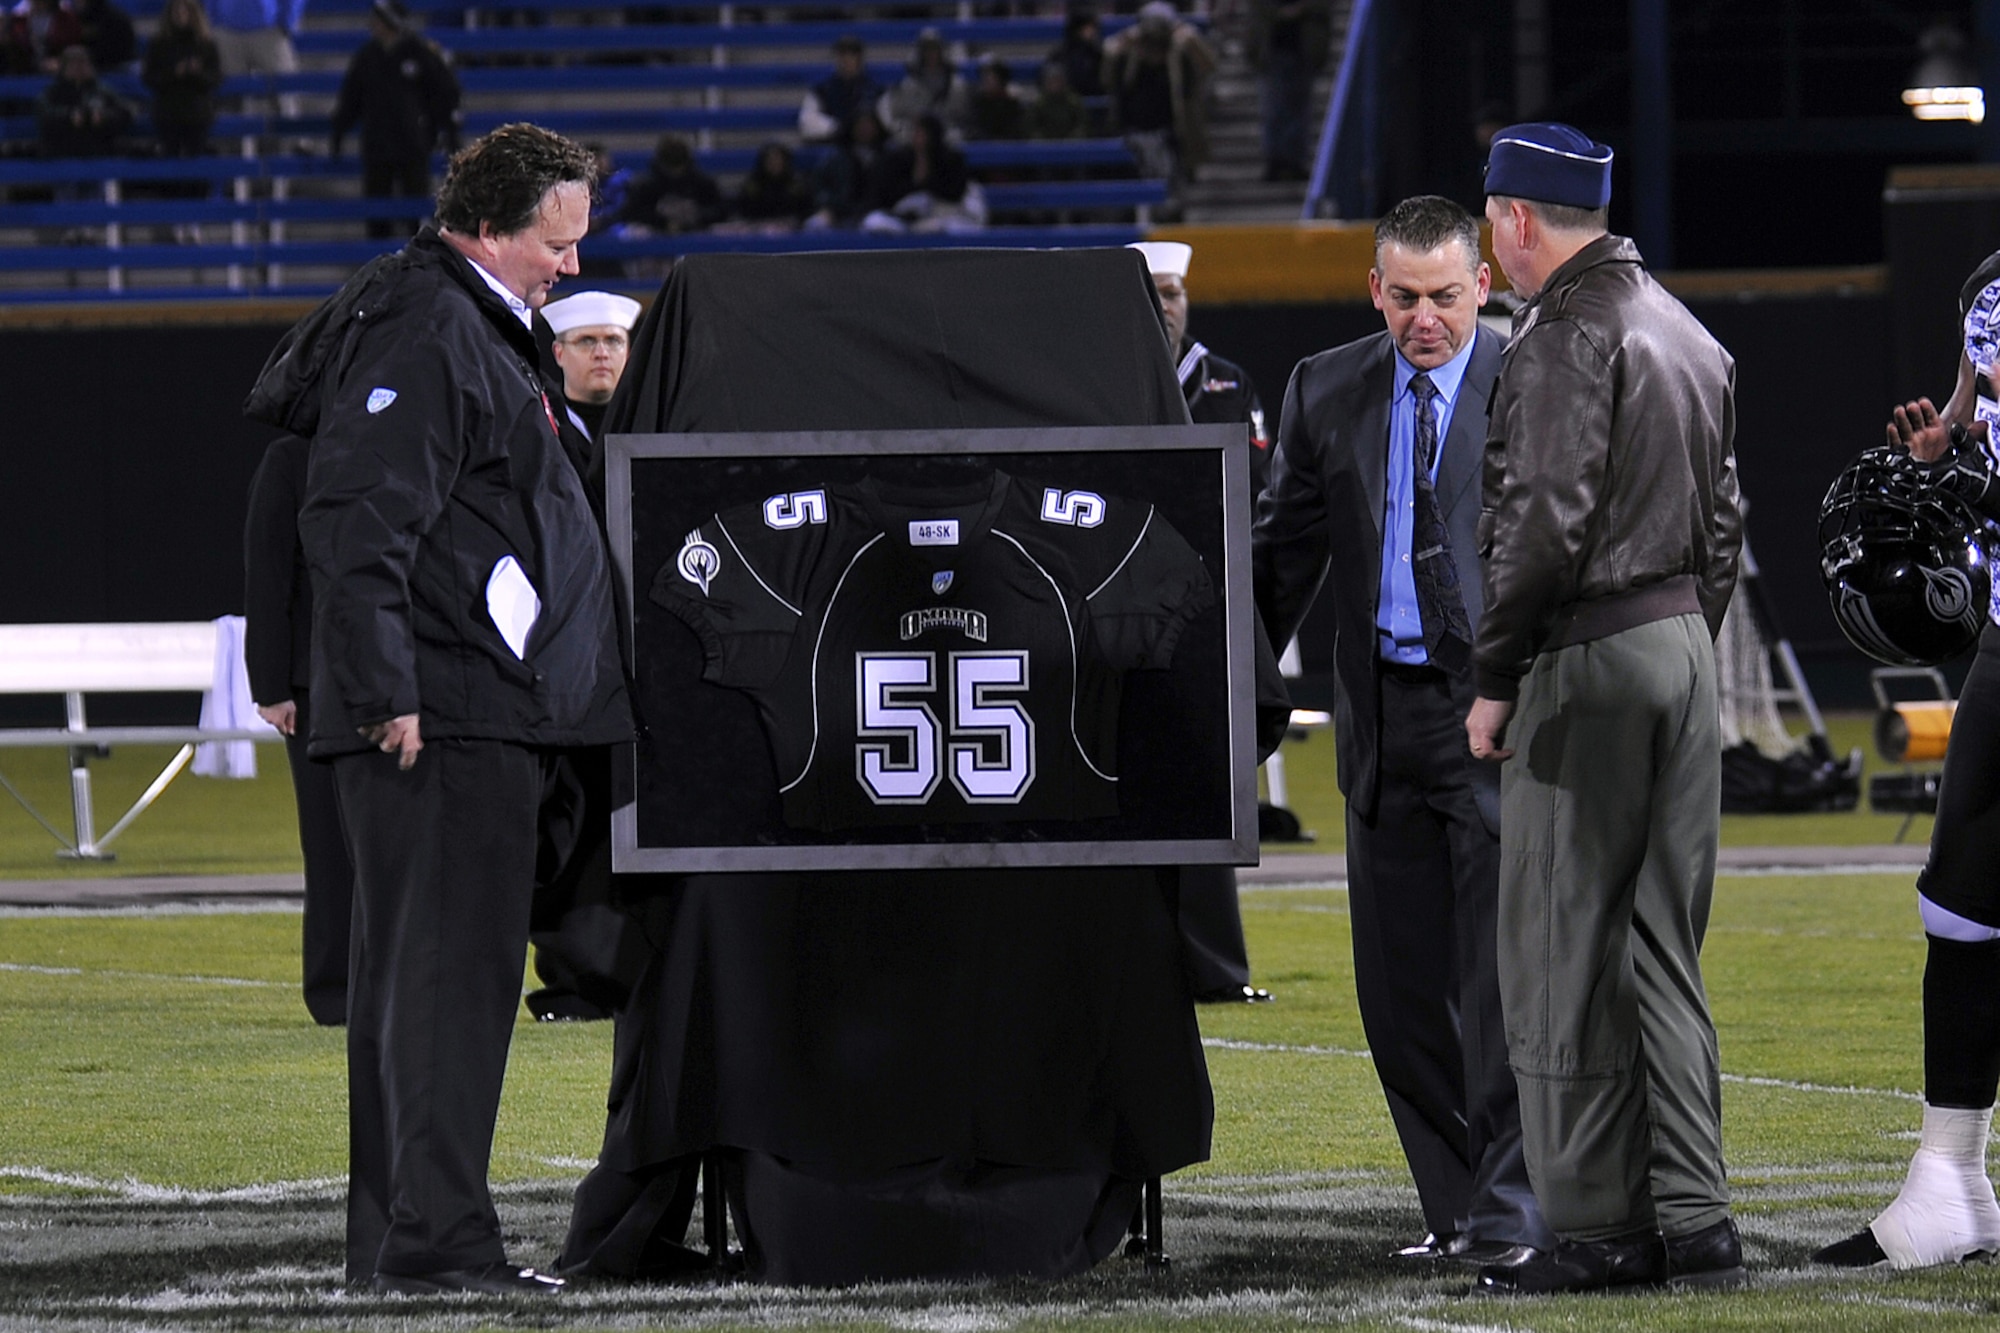 OFFUTT AIR FORCE BASE, Neb. - Don Igo, director of operations for the Omaha Nighthawks, and Rick Mueller, general manager of the Omaha Nighthawks, present a team jersey to Brig. Gen. John N.T. Shanahan during their military appreciation game at the Rosenblatt Stadium Nov. 19. Military members from all branches were celebrated at the game, which ended with a Florida Tuskers win 27 to 10.U.S. Air Force Photo by Charles Haymond (Released)